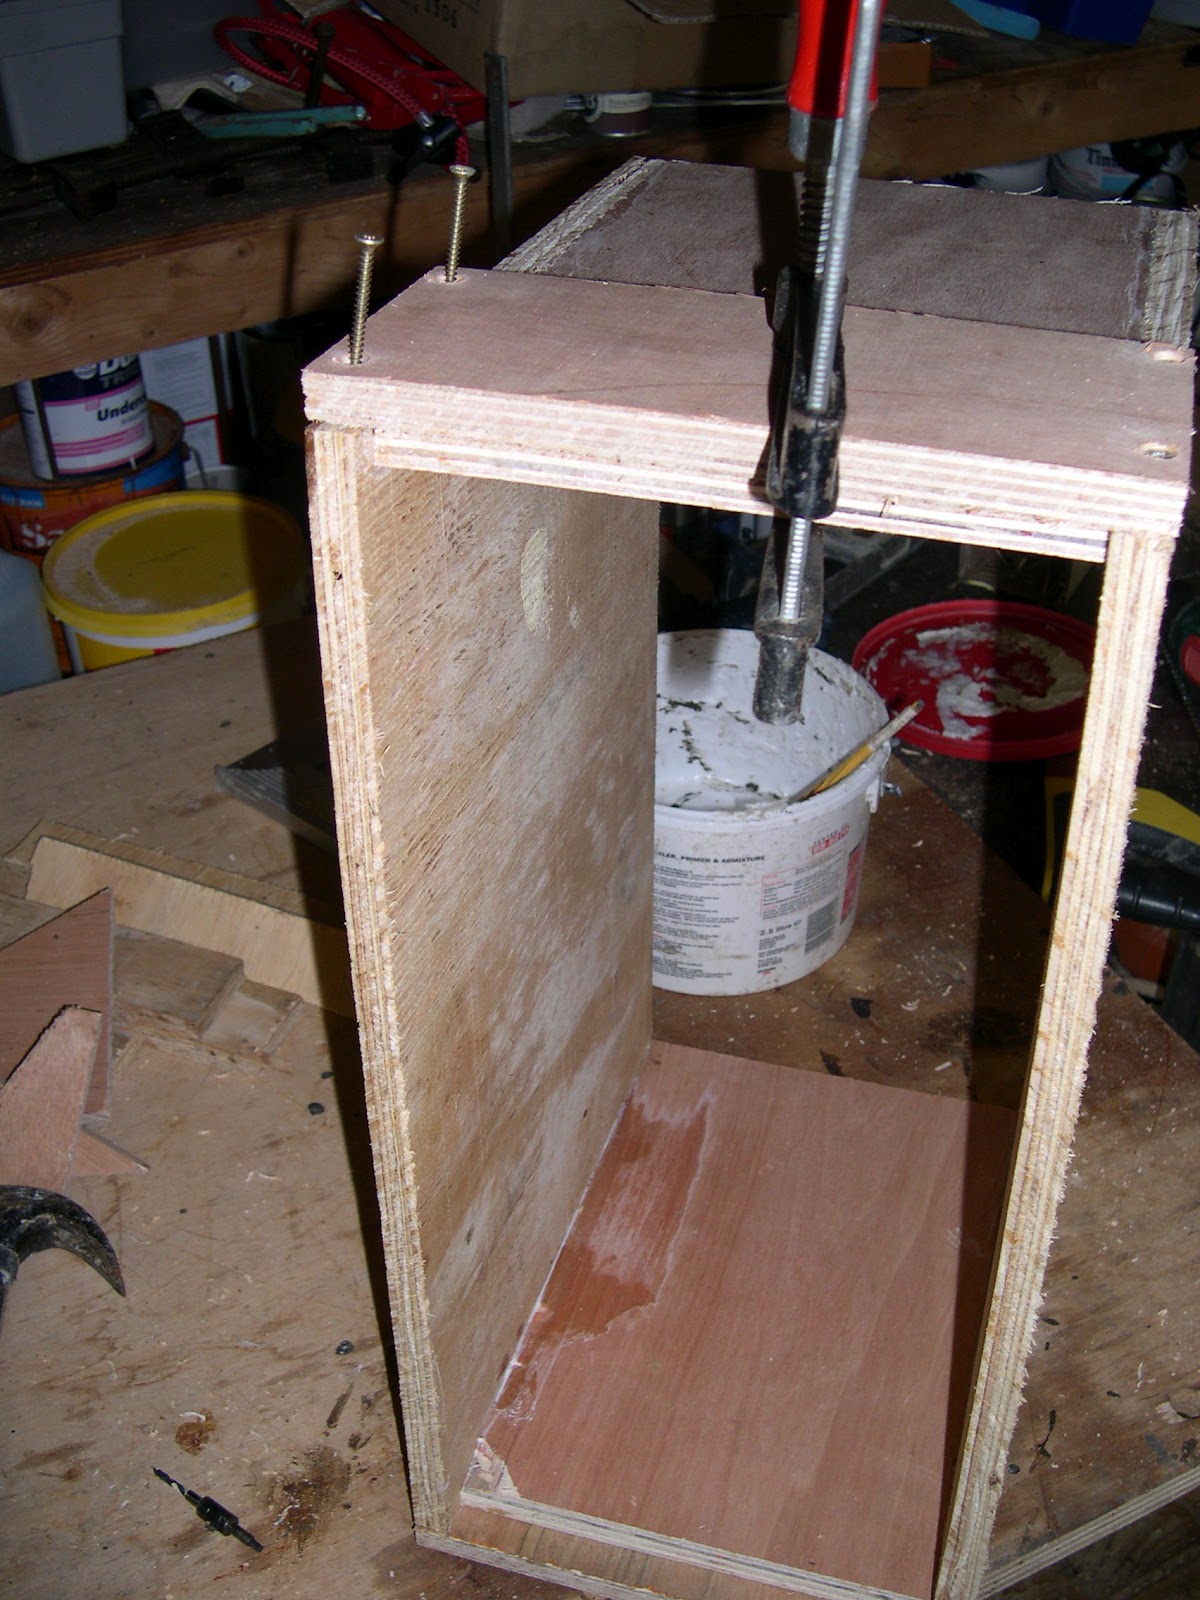  Brittany: How to Build a Dadant Five frame Nucleus Hive or Ruchette